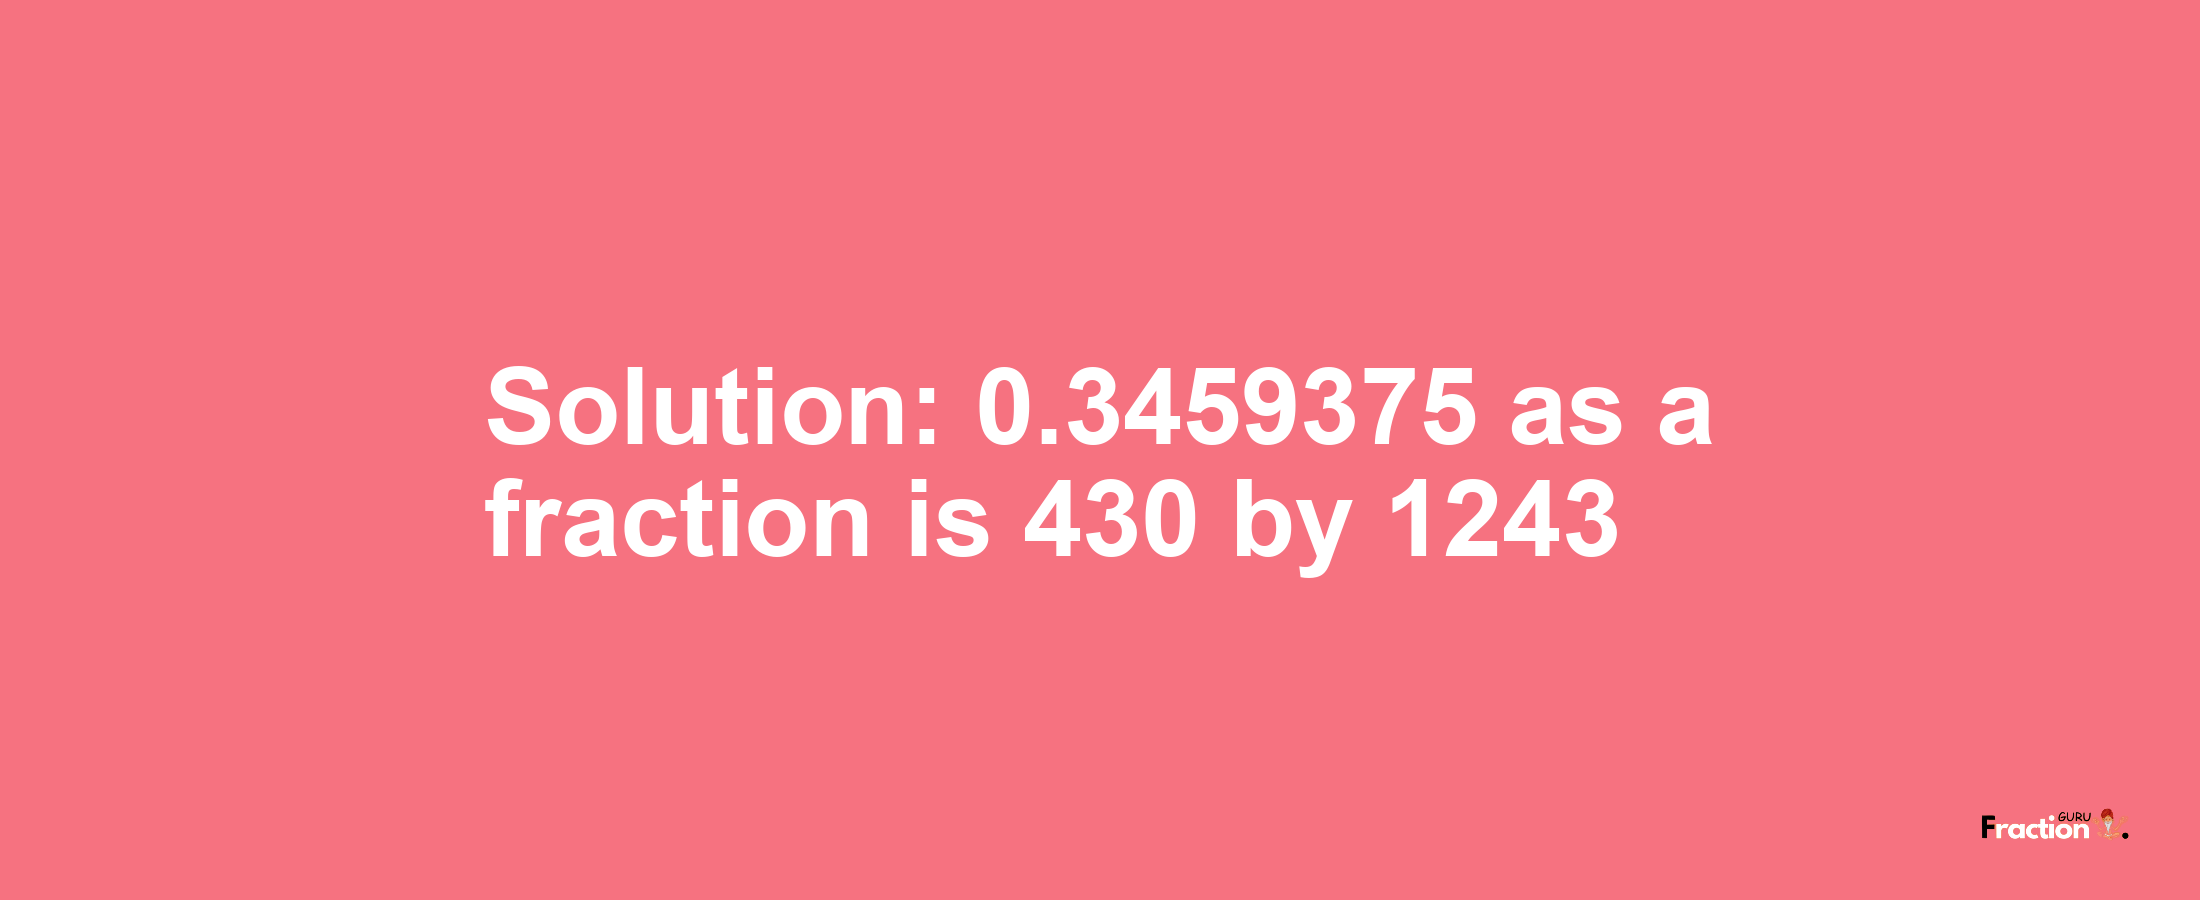 Solution:0.3459375 as a fraction is 430/1243